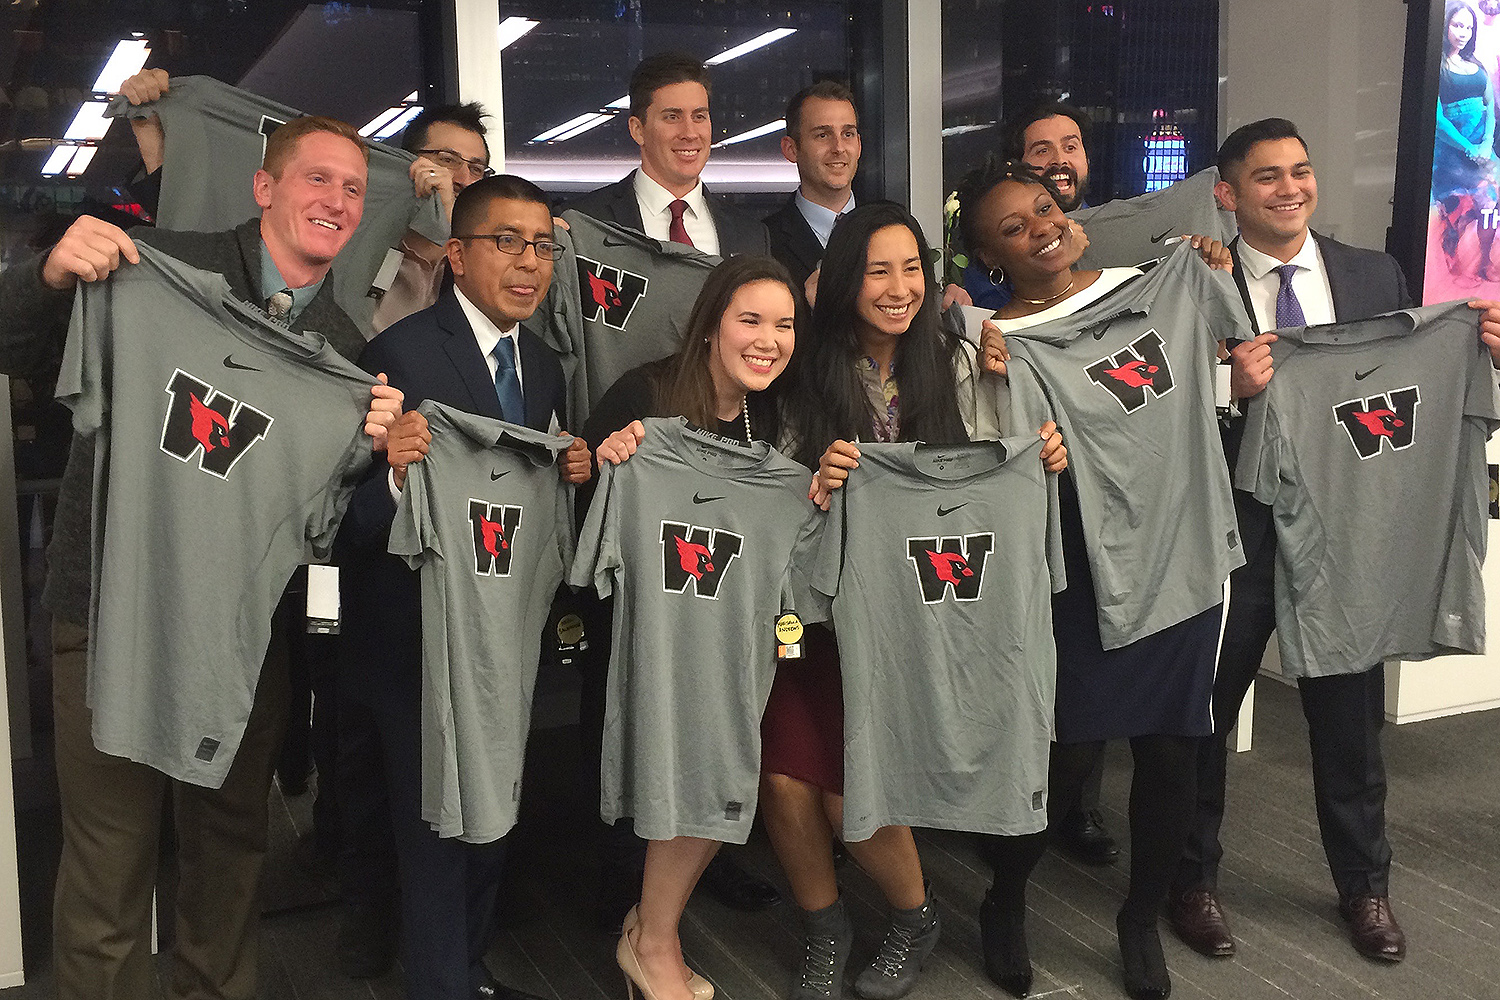 Wesleyan's Posse Foundation Veteran Scholars Program offers a four-year, full-tuition leadership scholarship to military veterans.